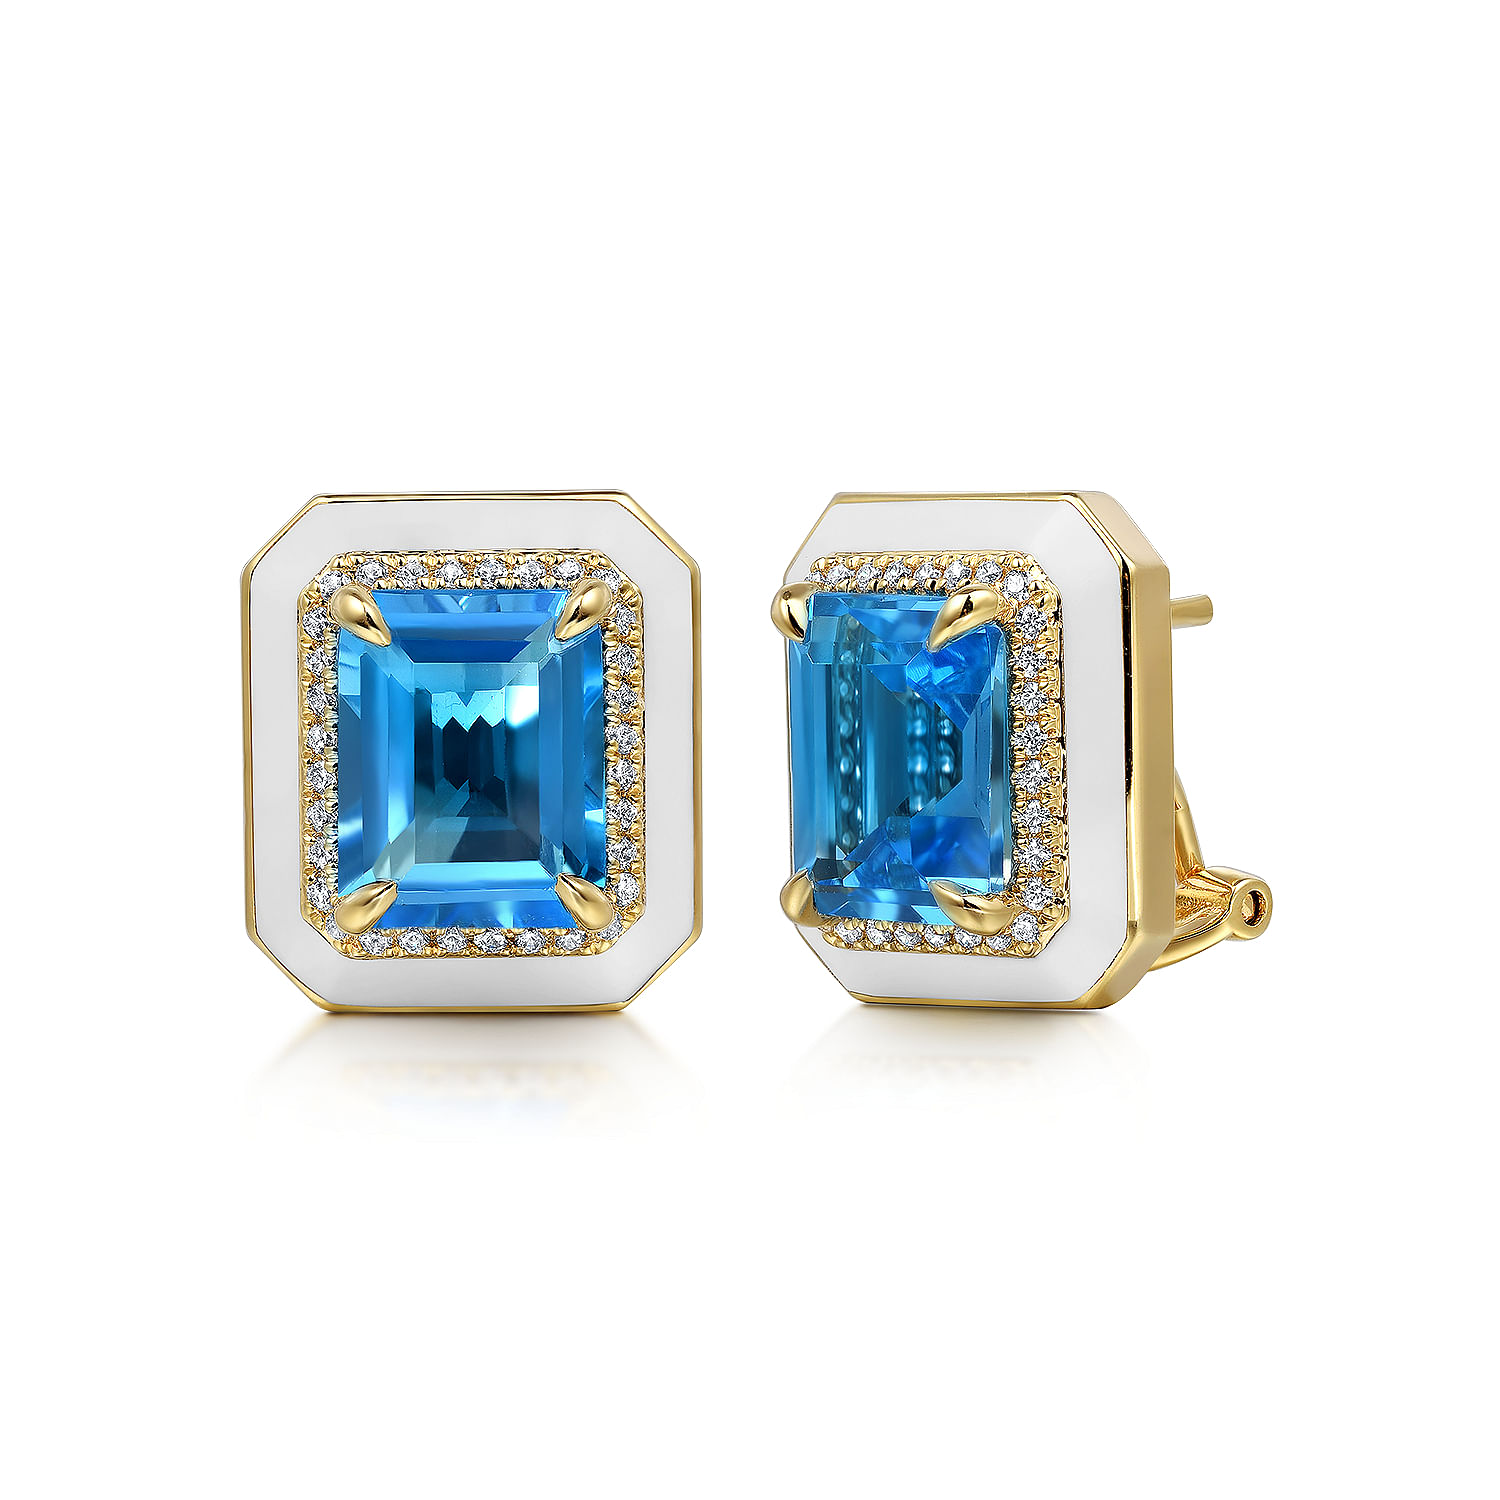 14K Yellow Gold Diamond and Blue Topaz Emerald Cut Earring With Flower Pattern J-Back and White Enamel